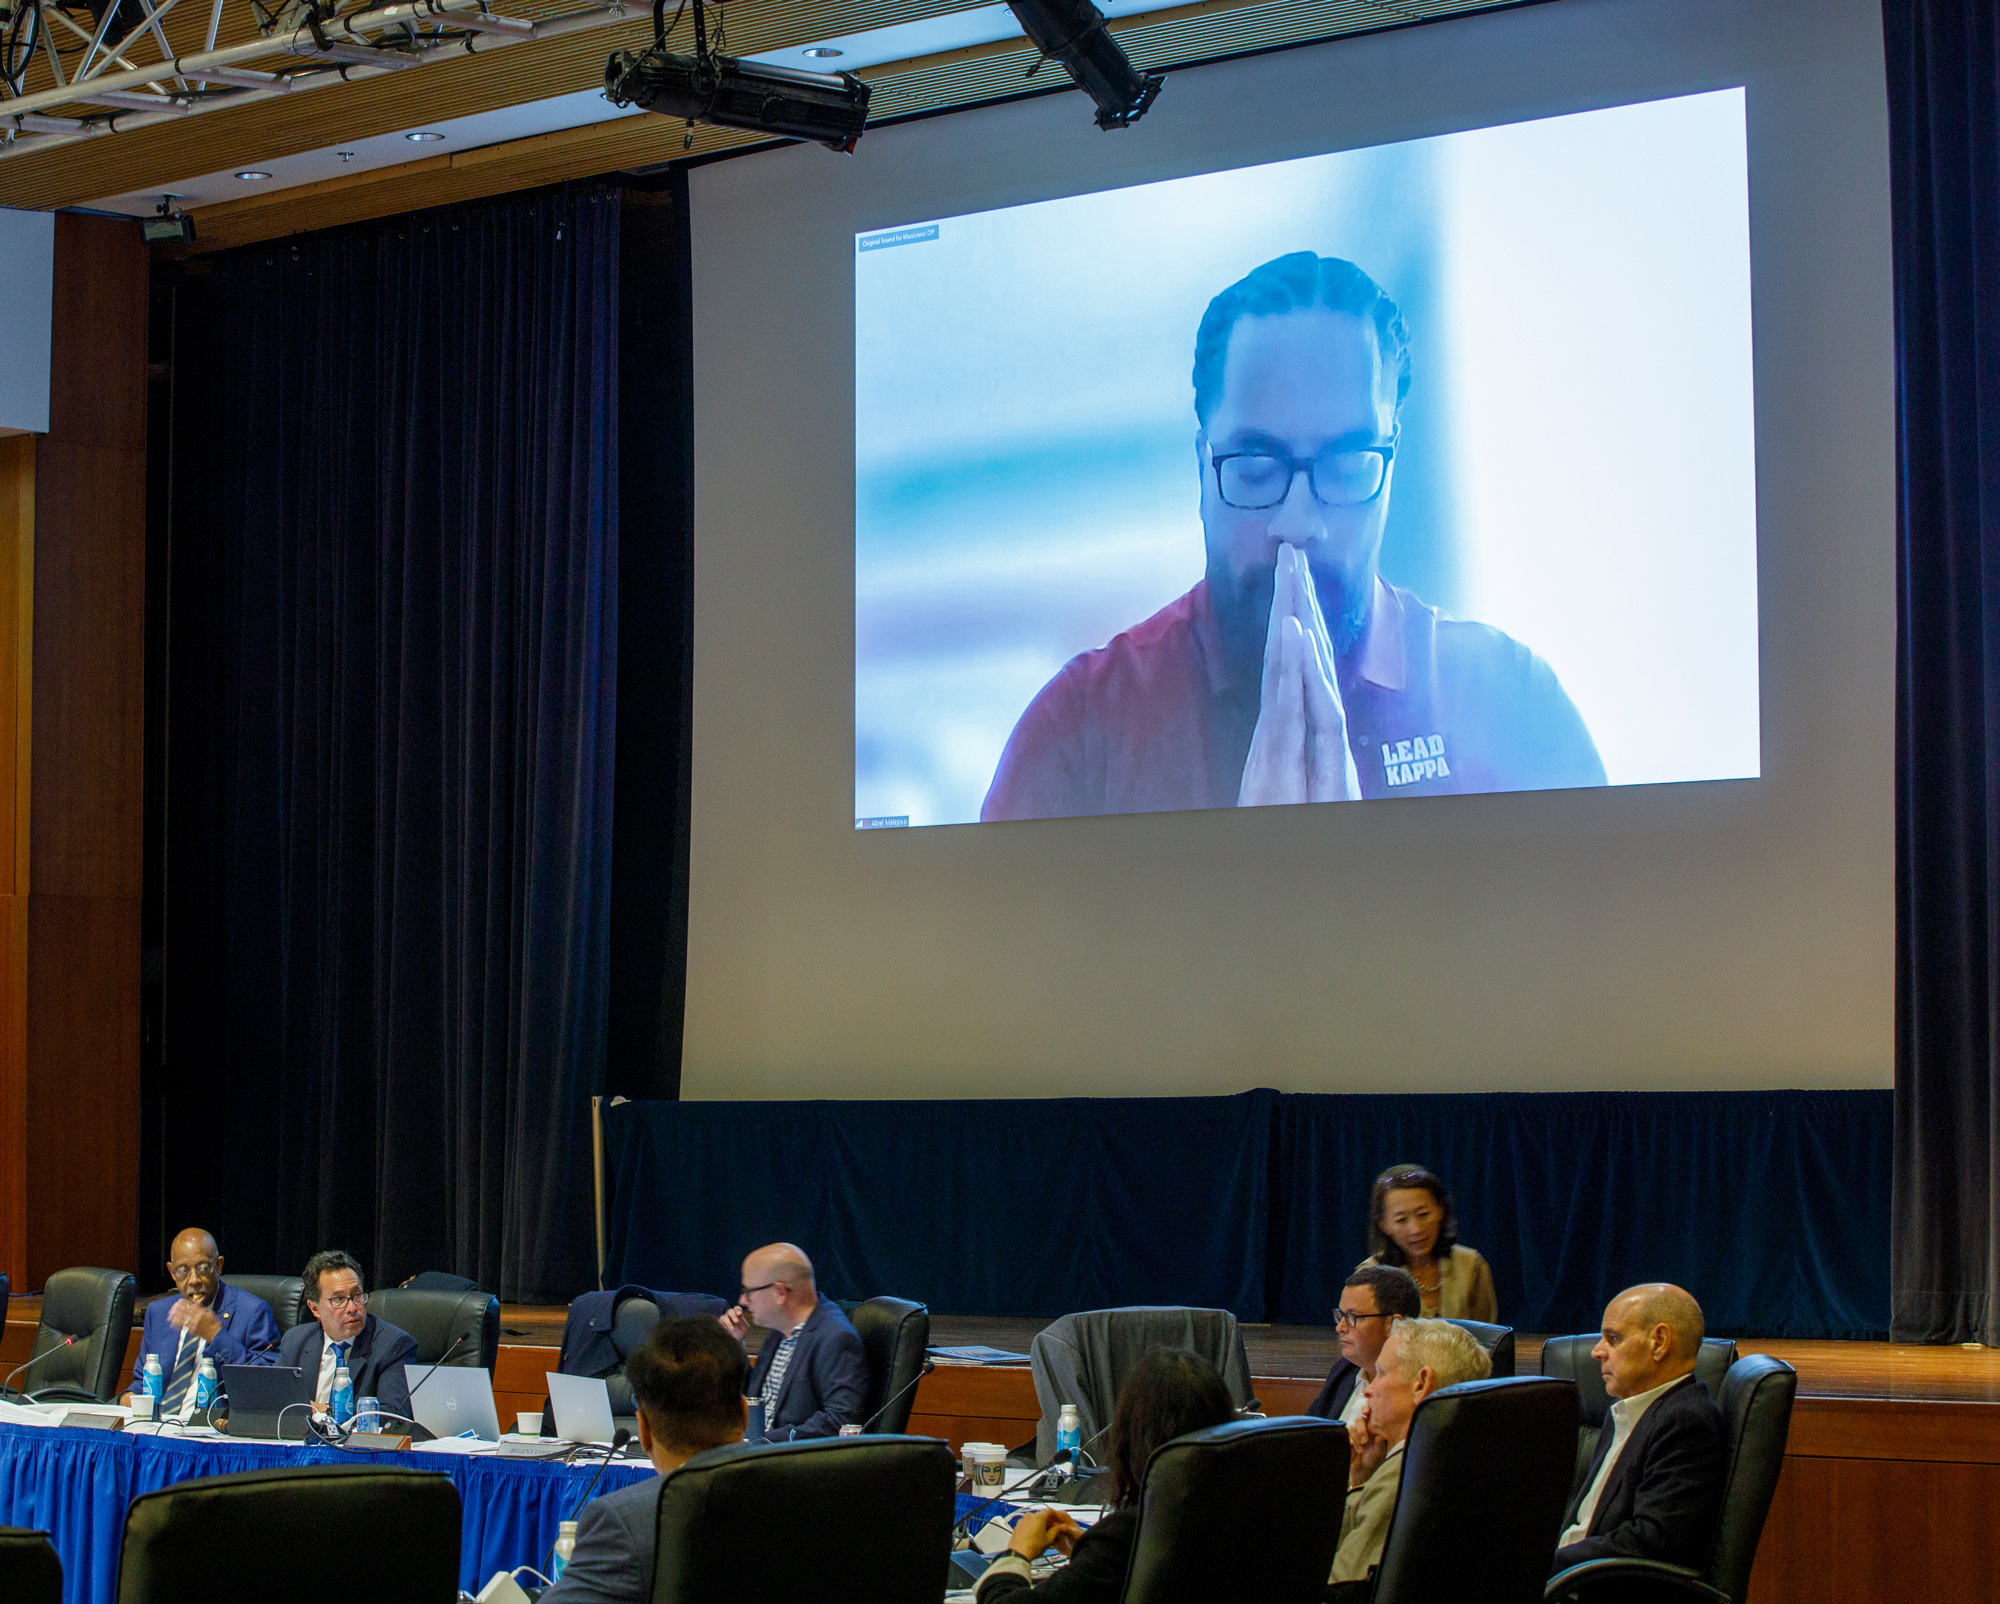 Abiel Malepeai, a young Samoan man with a beard and glasses, holds his hands clasped over his mouth, eyes lowered, while speaking on a projector screen to the Regents meeting